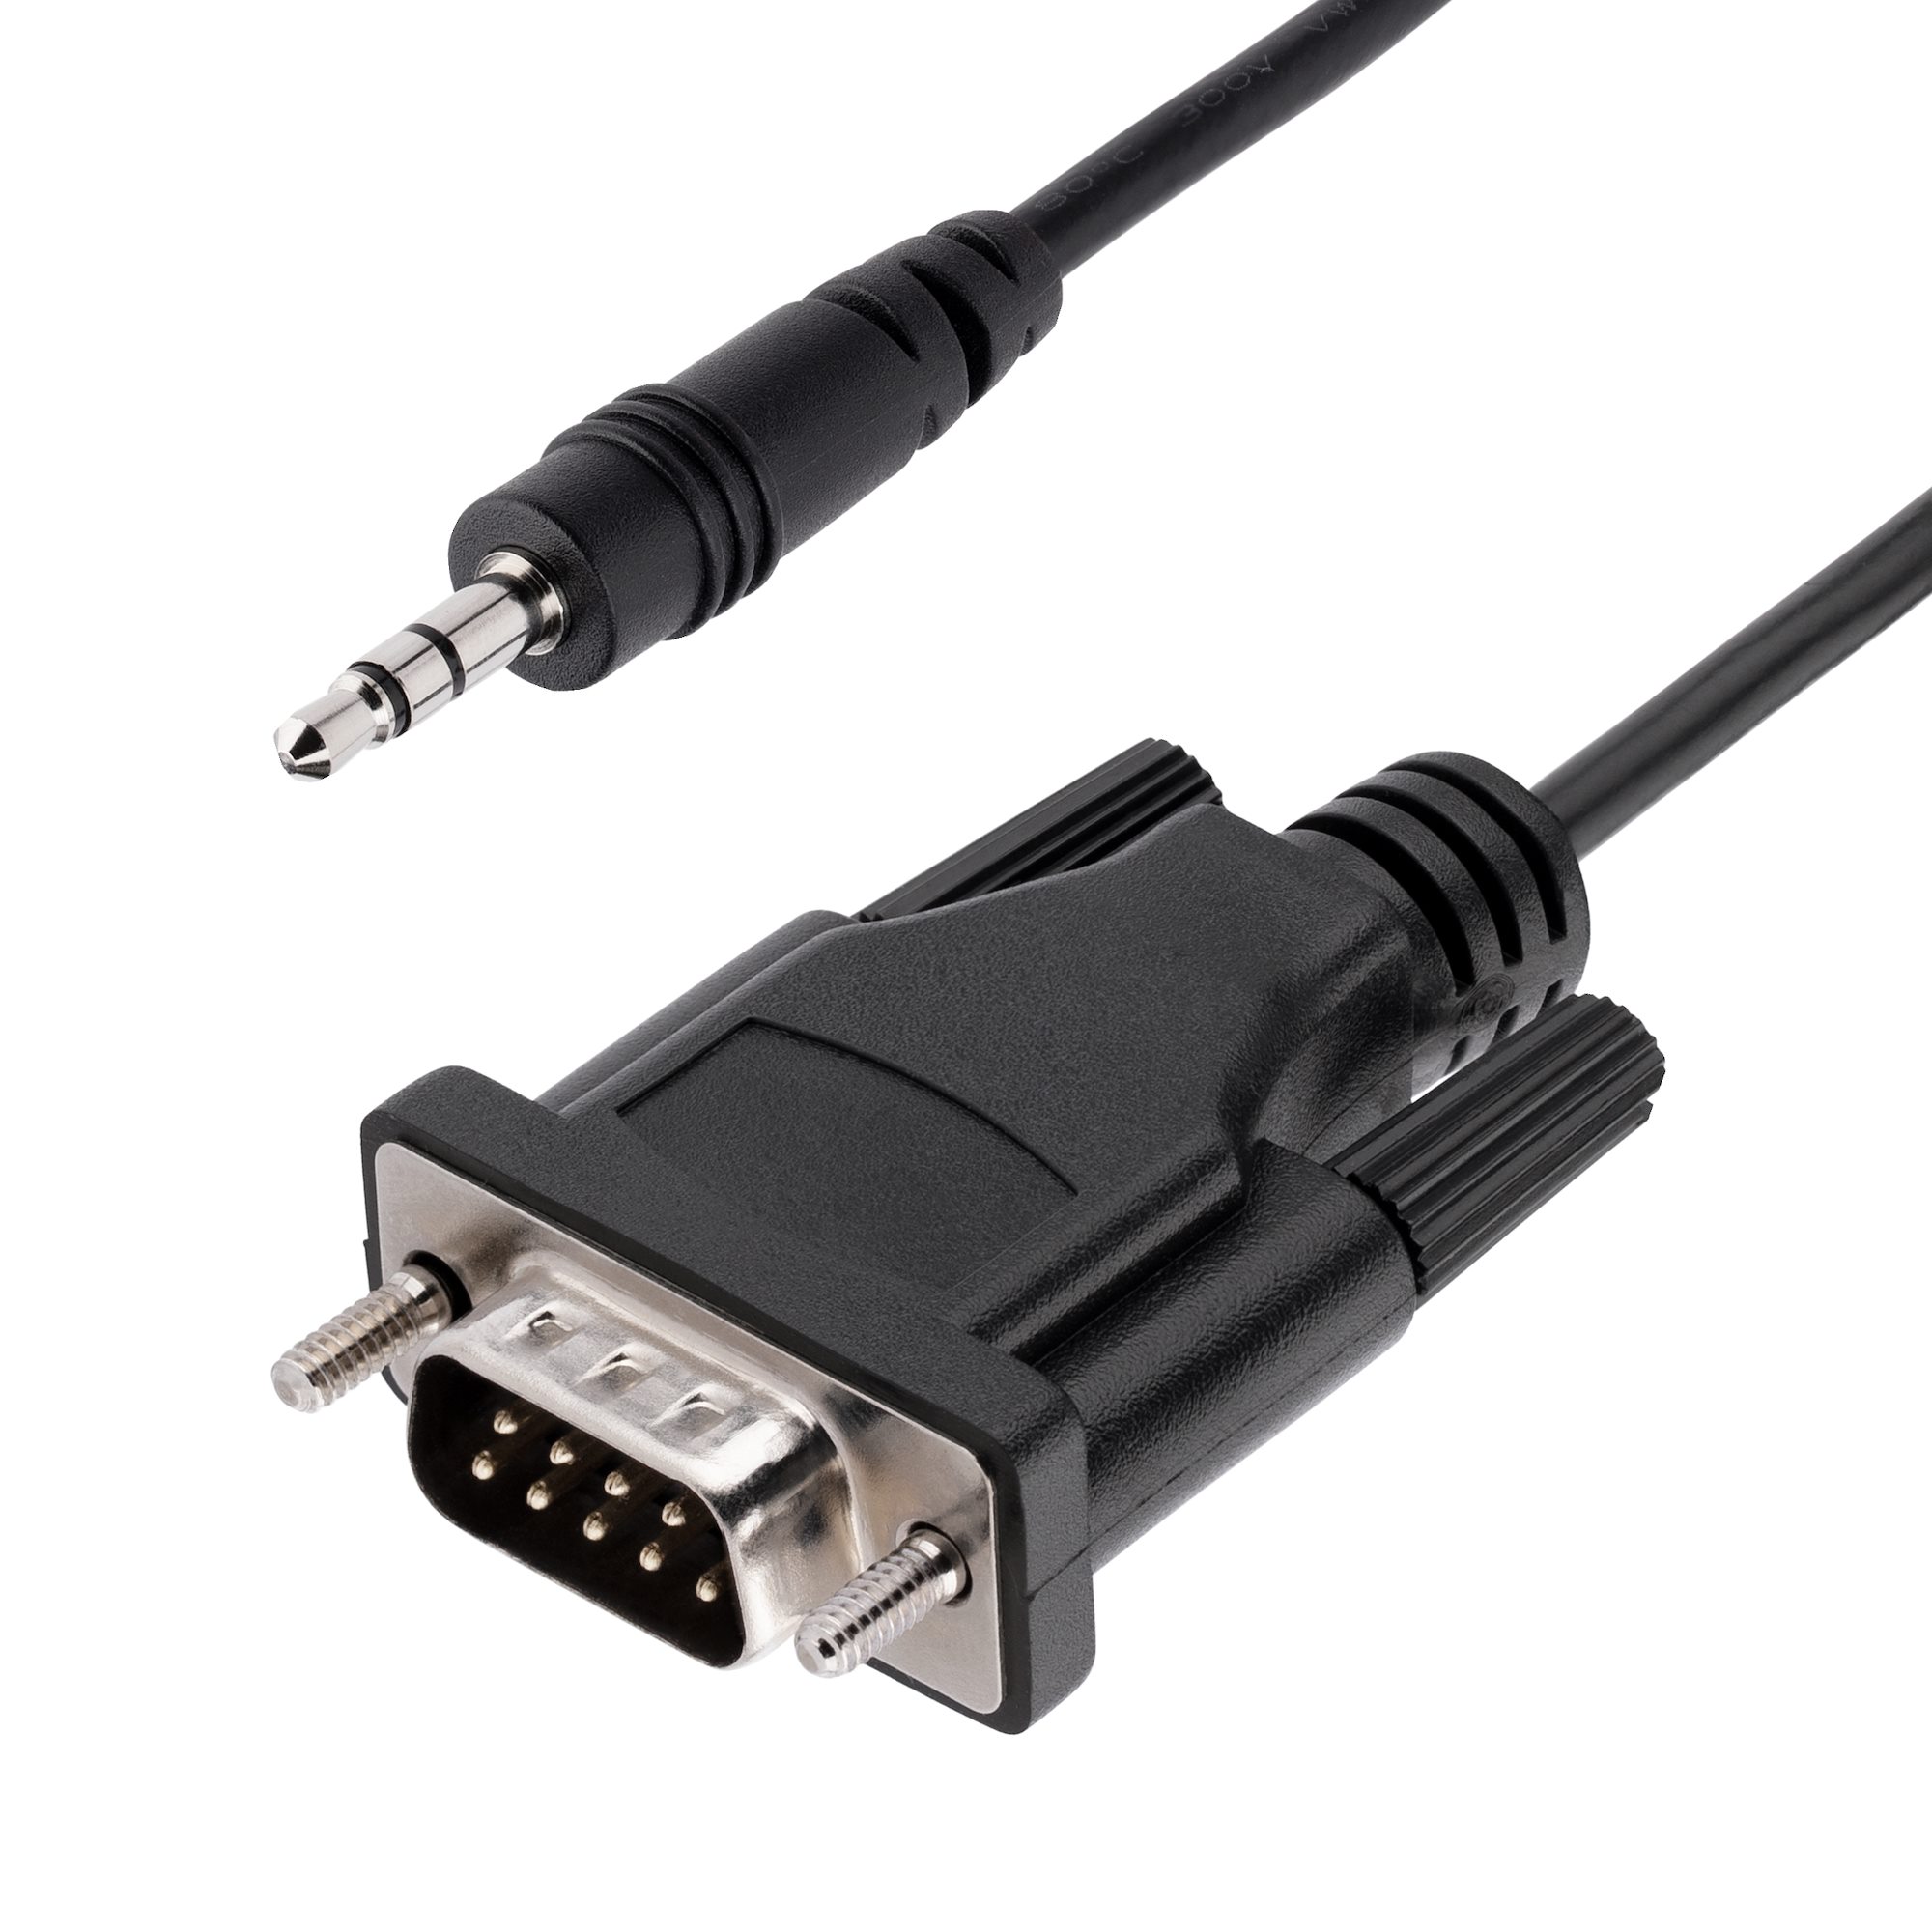 3ft (1m) DB9 to 3.5mm Serial Cable for Serial Device Configuration, RS232  DB9 Male to 3.5mm Cable Used for Calibrating Projectors, Digital Signage